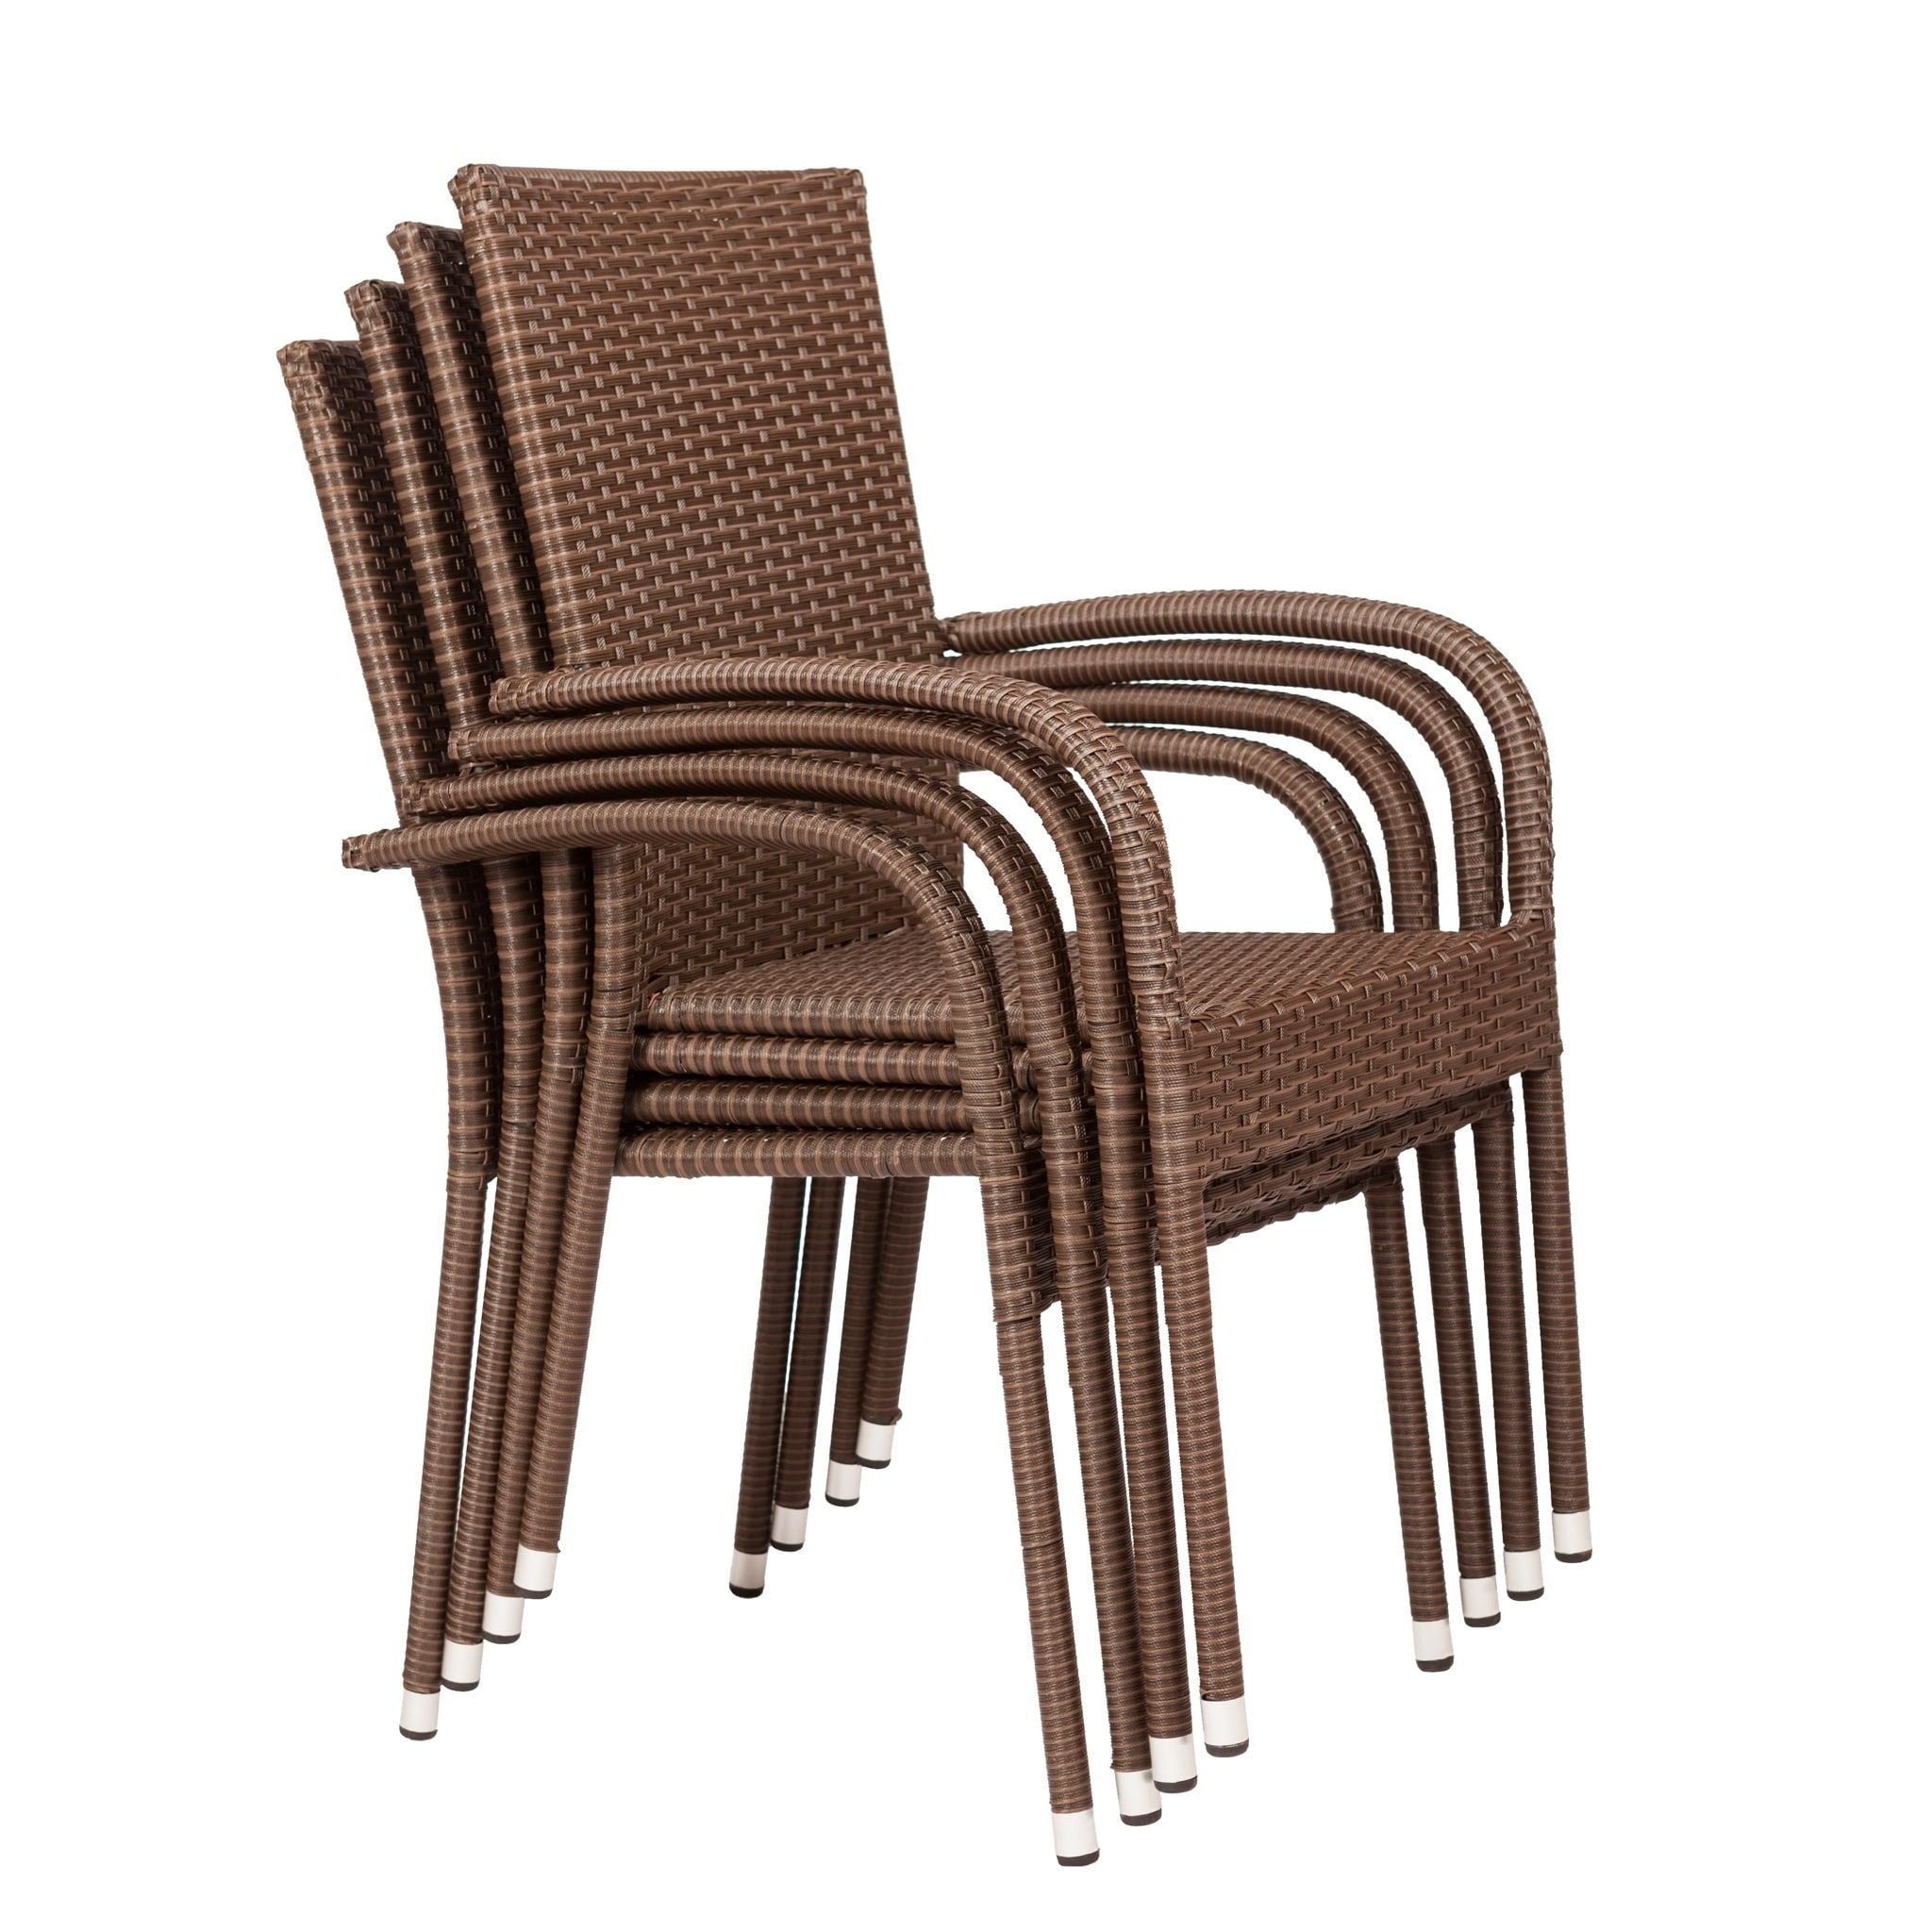 stackable outdoor chairs canada